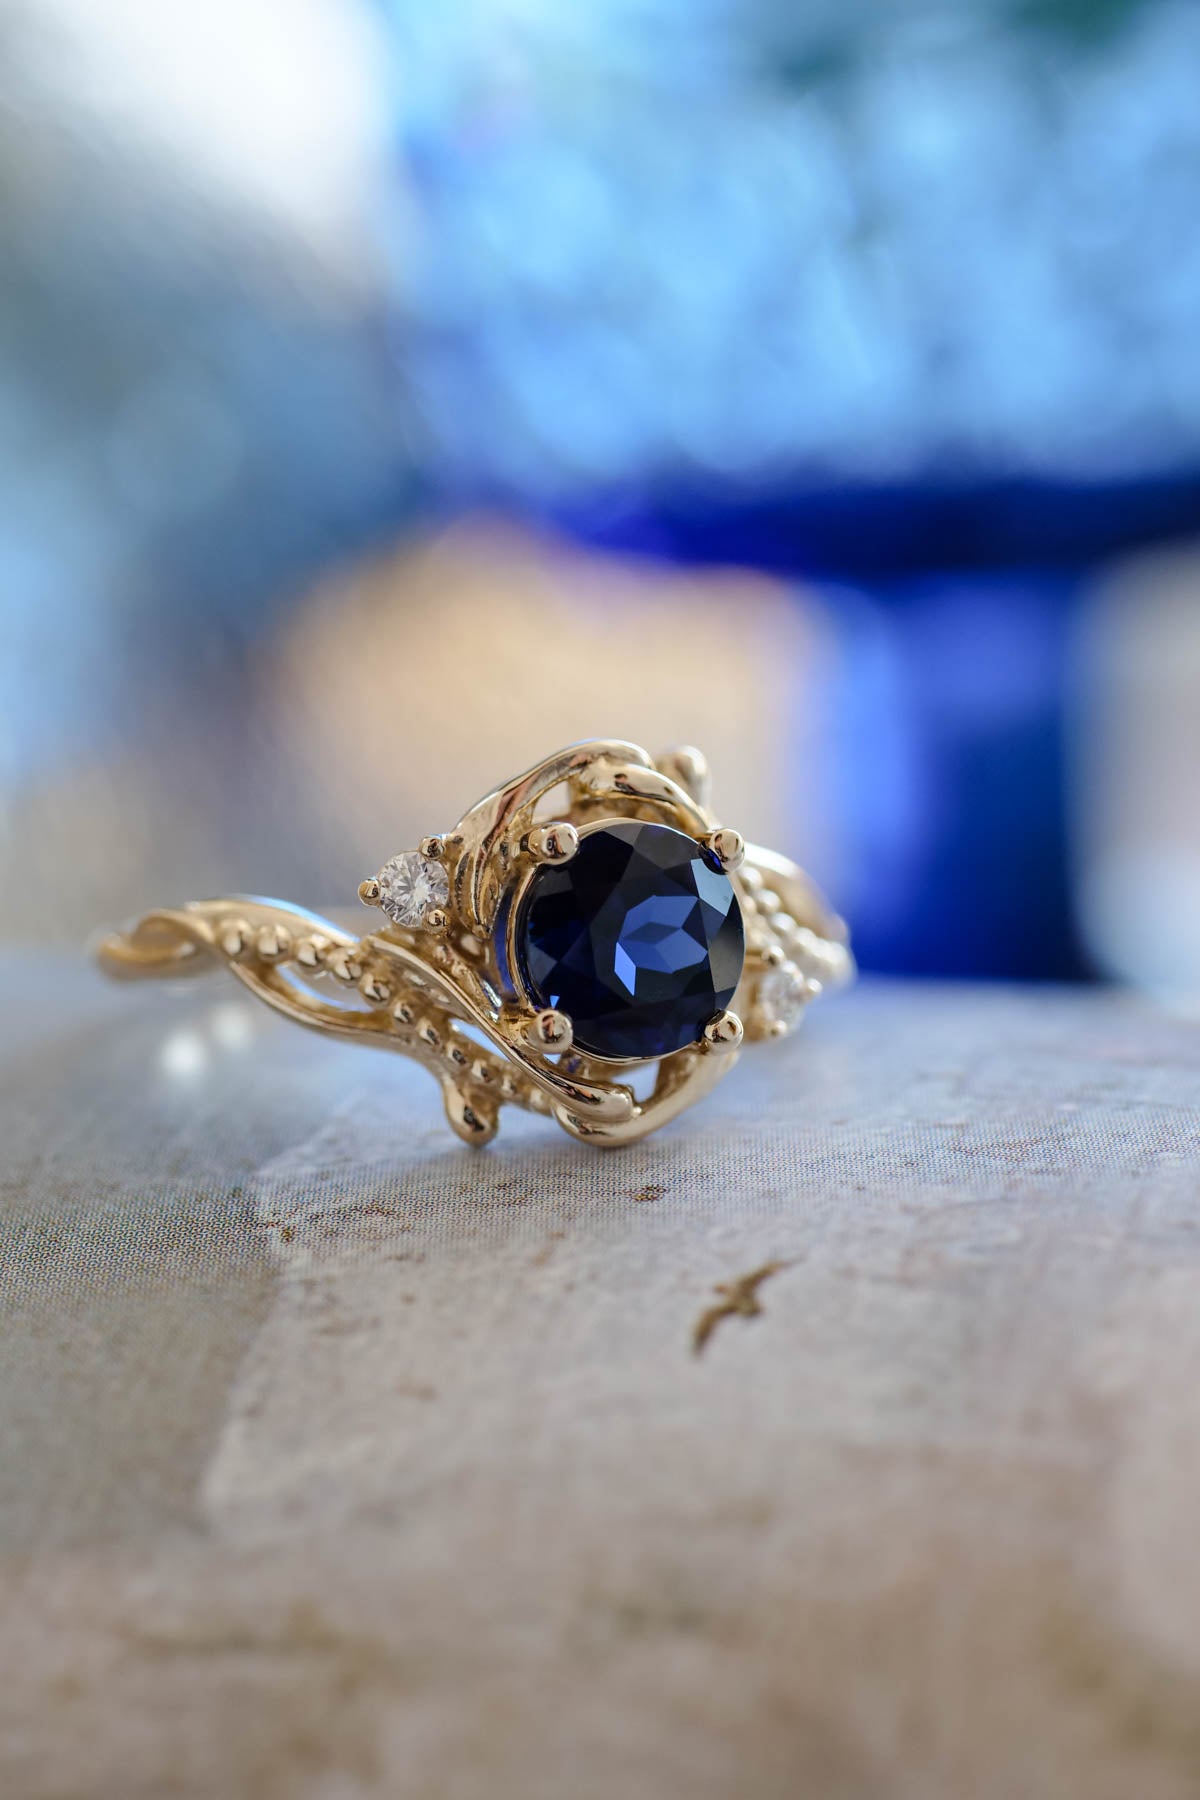 Sapphire Meaning | With Clarity